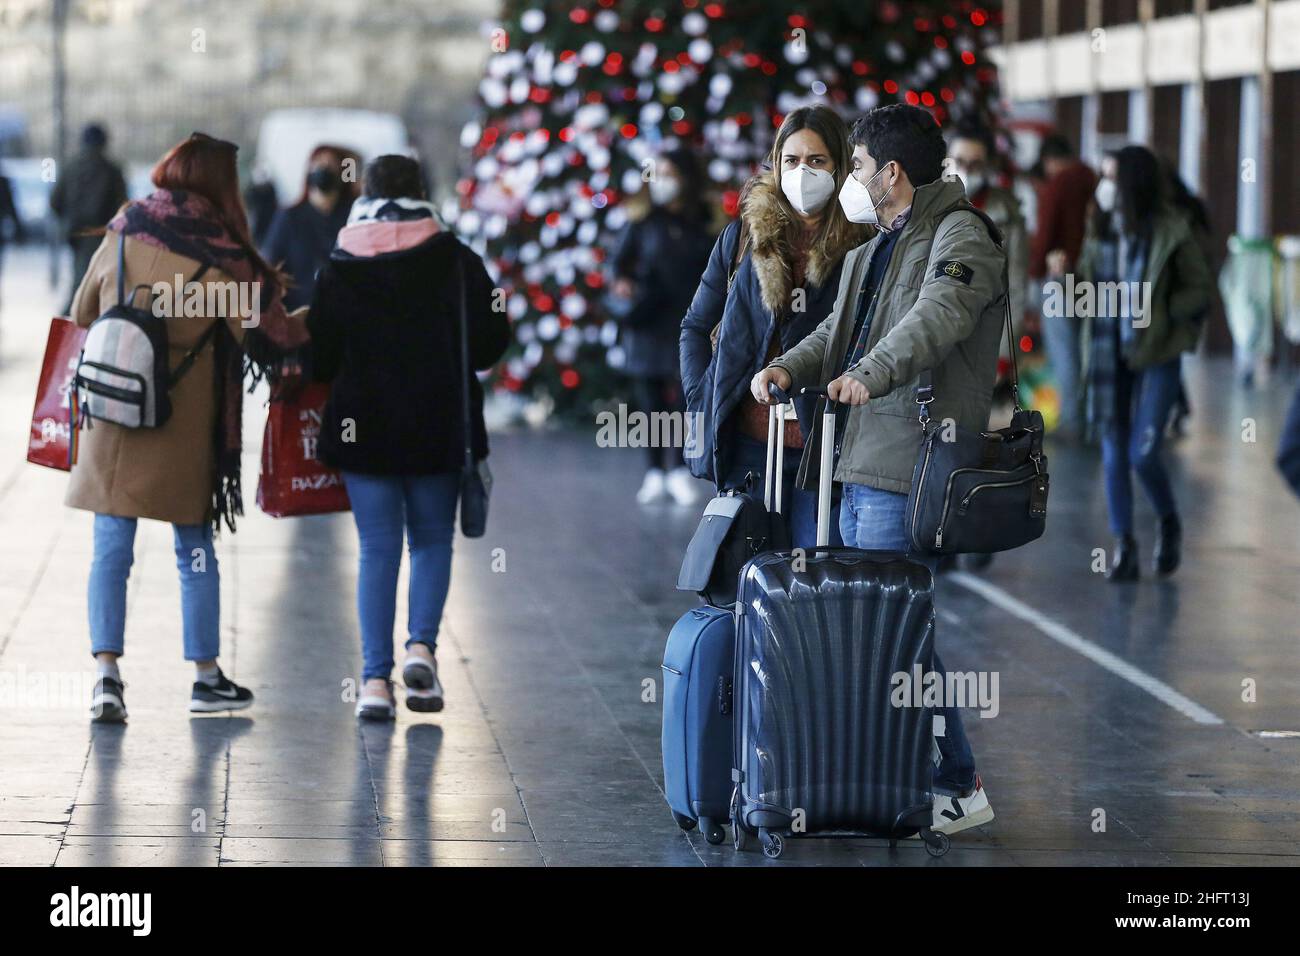 Cecilia Fabiano/LaPresse December 17 , 2020 Roma (Italy) News: Travel for Christmas time In the Pic : The passengers passing near the Christmas tree in front of Termini Station Stock Photo